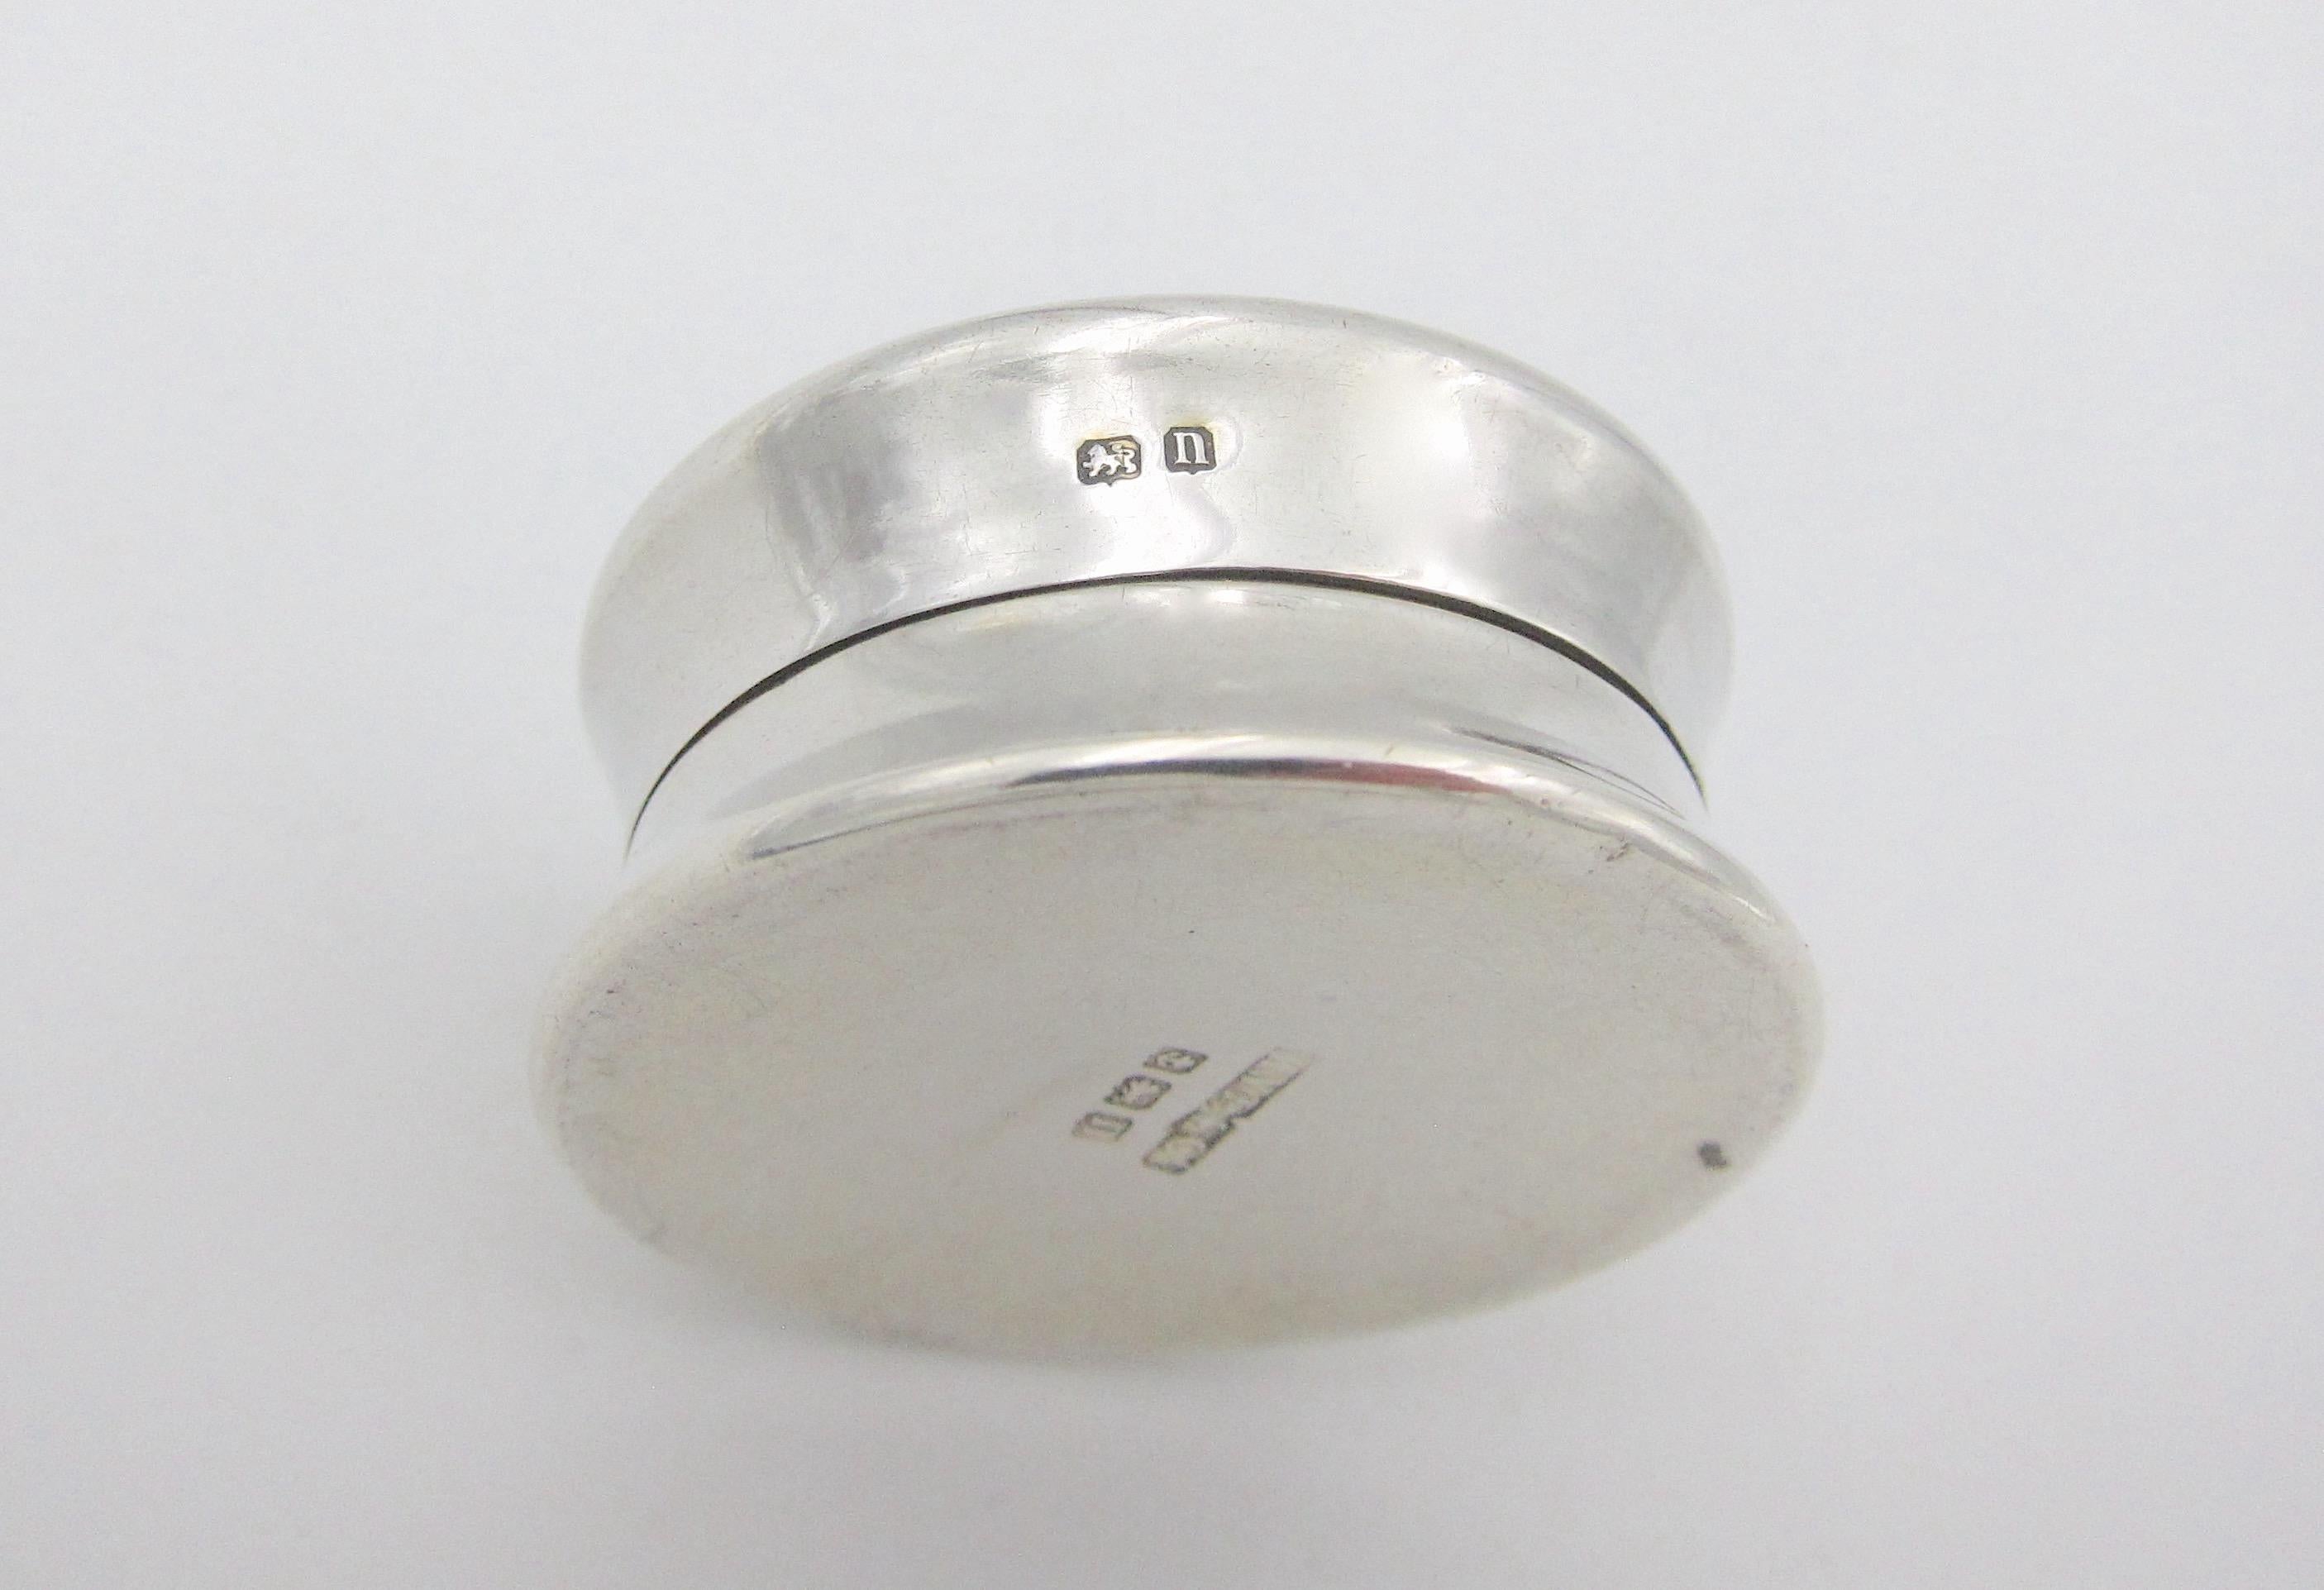 20th Century English Sterling Silver Pill Box with Guilloche Enamel Lid by H. V. Pithey & Co.